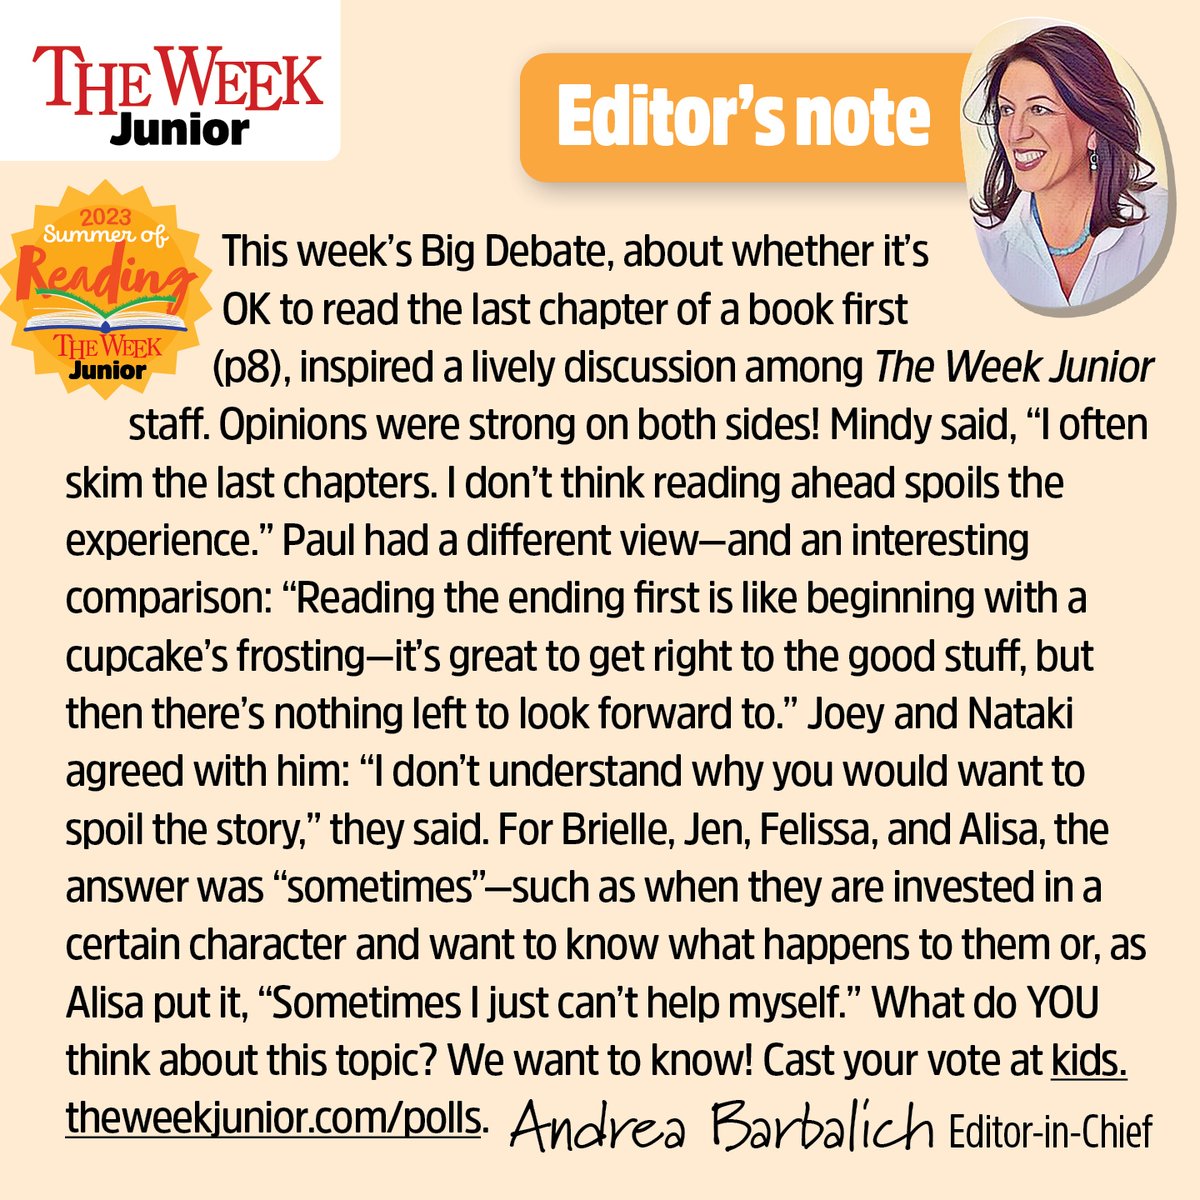 Is it OK to read the last chapter first? It's our latest Big Debate question, and The Week Junior's editorial staff had A LOT to say on this topic! @abarbalich summarizes their thoughts in this week's editor's note! #SummerOfReading #BigDebate